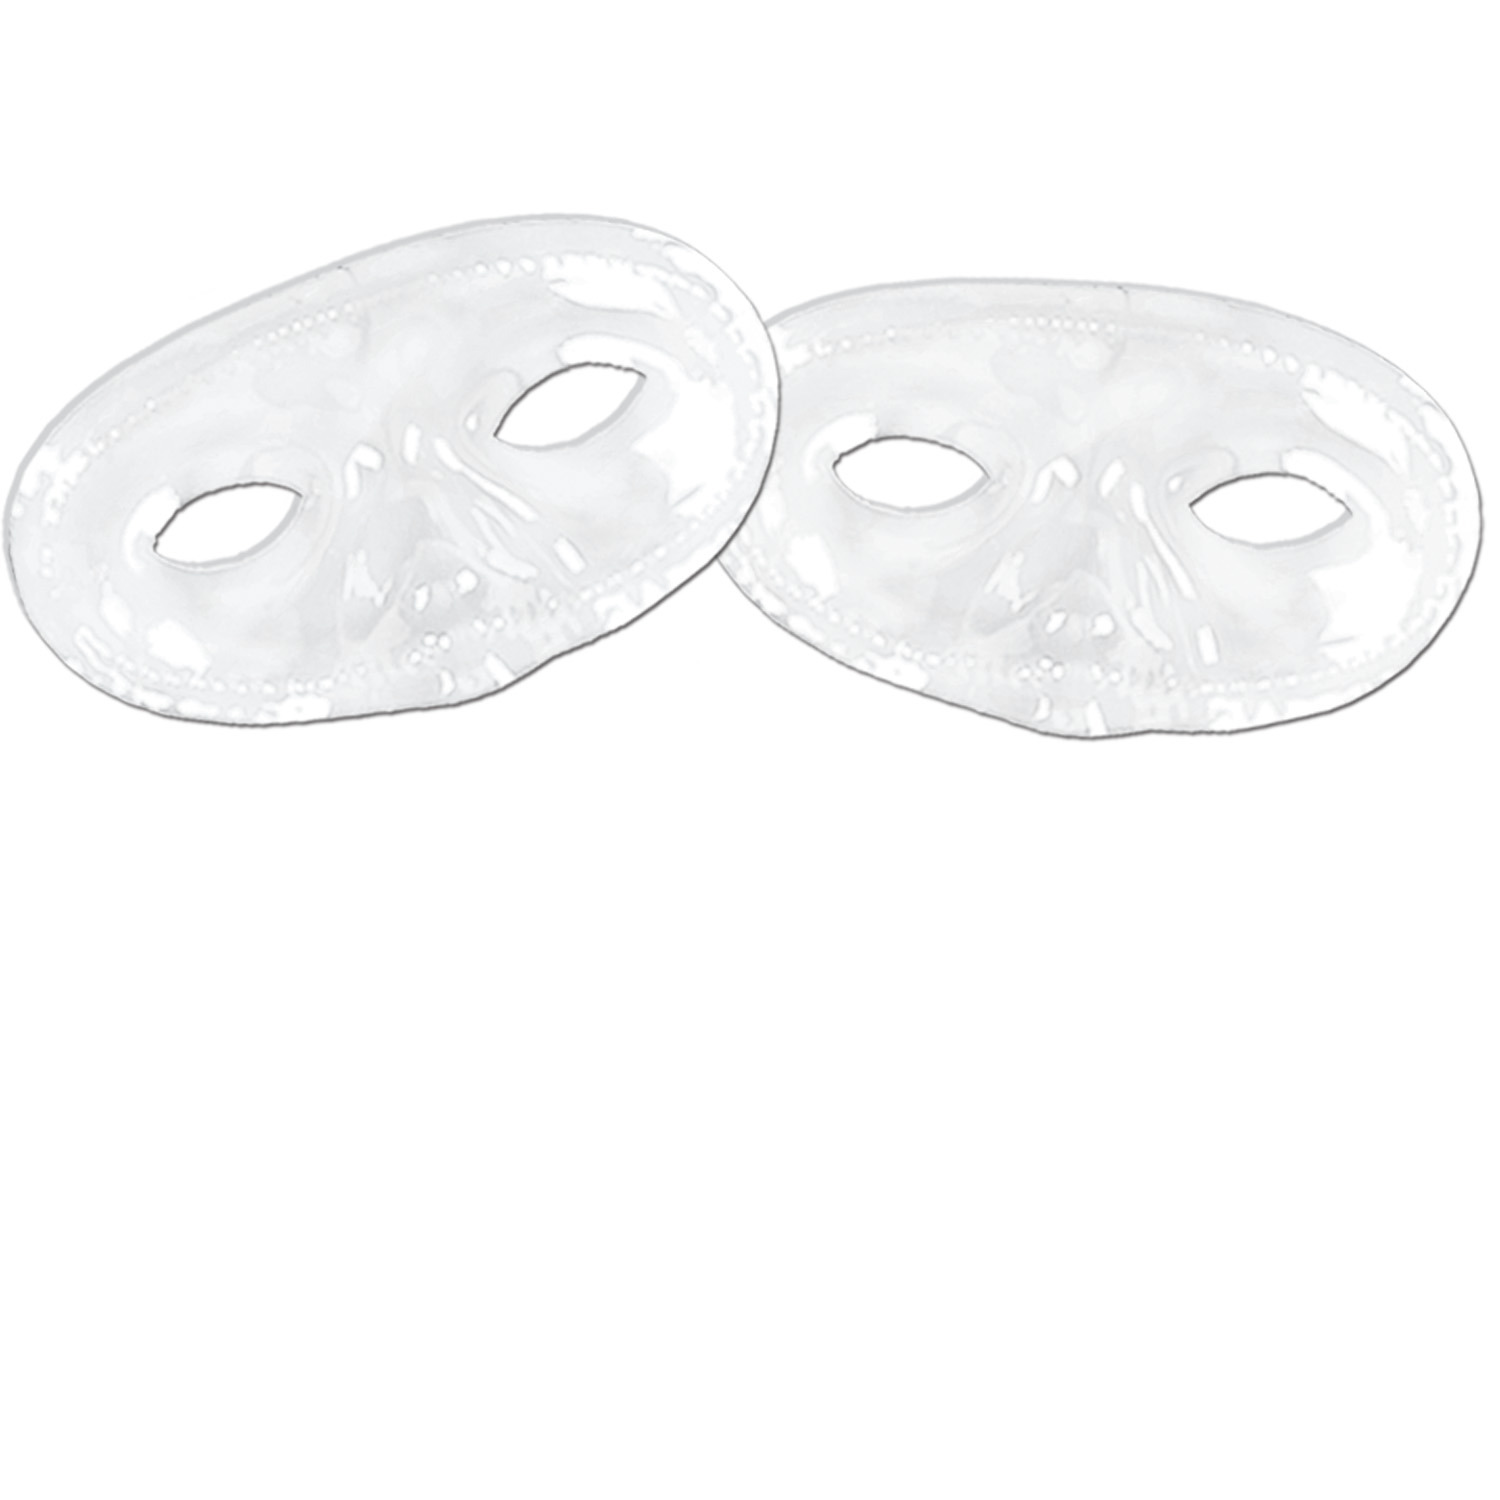 white plastic masquerade masks with an elastic strap